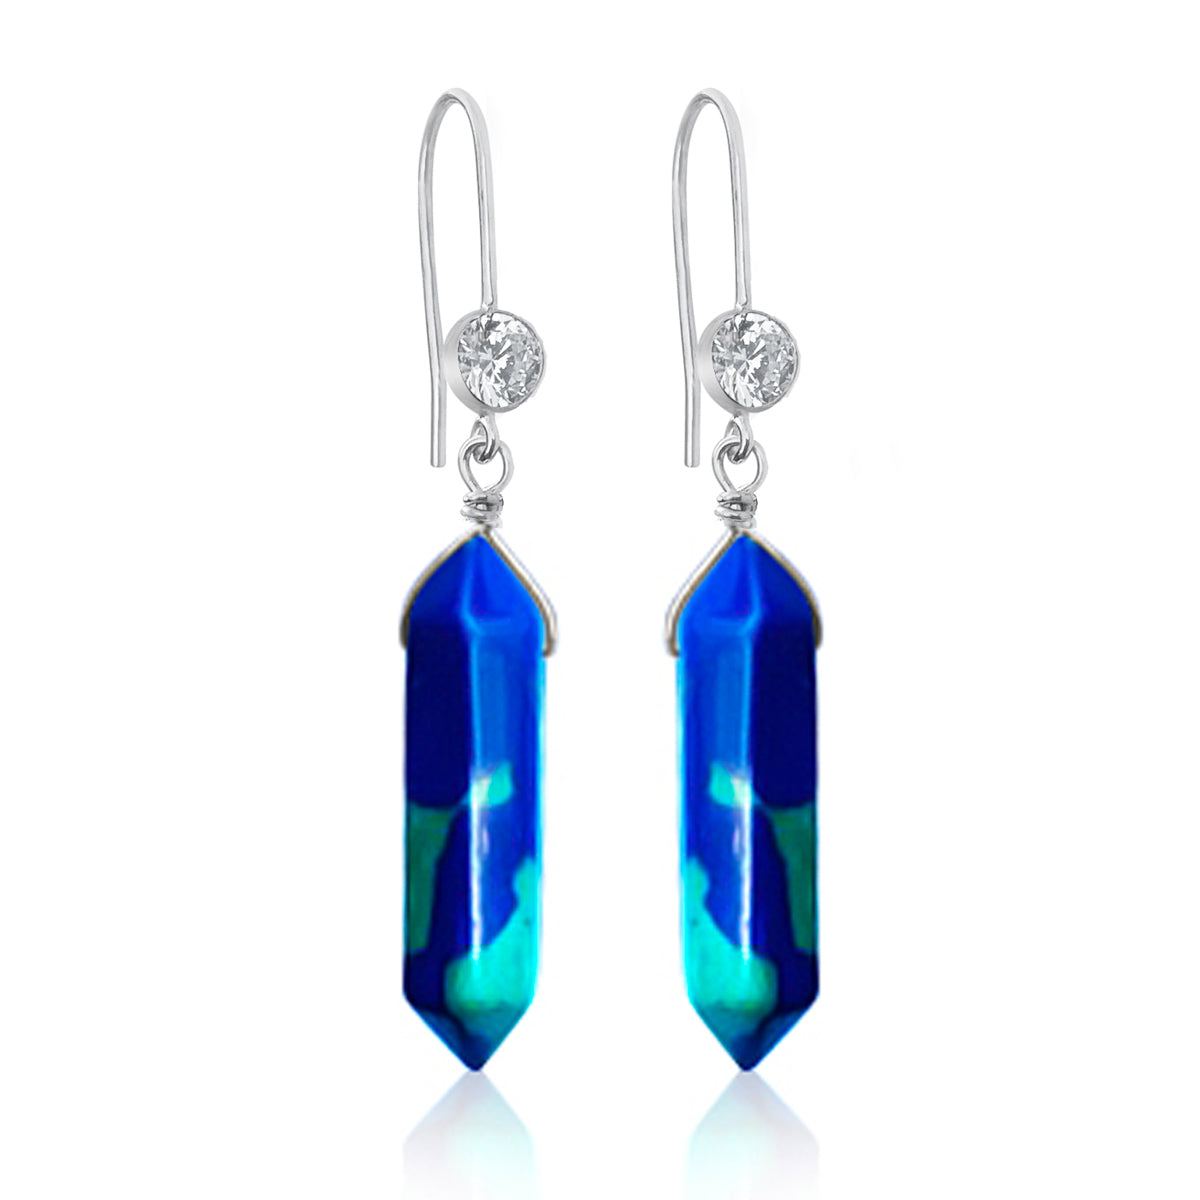 The Peaceful Waters Chrysocolla Earrings are a stunning pair of earrings that feature two polished Chrysocolla stones. Chrysocolla is known for its calming and soothing energy, promoting inner peace and tranquility.